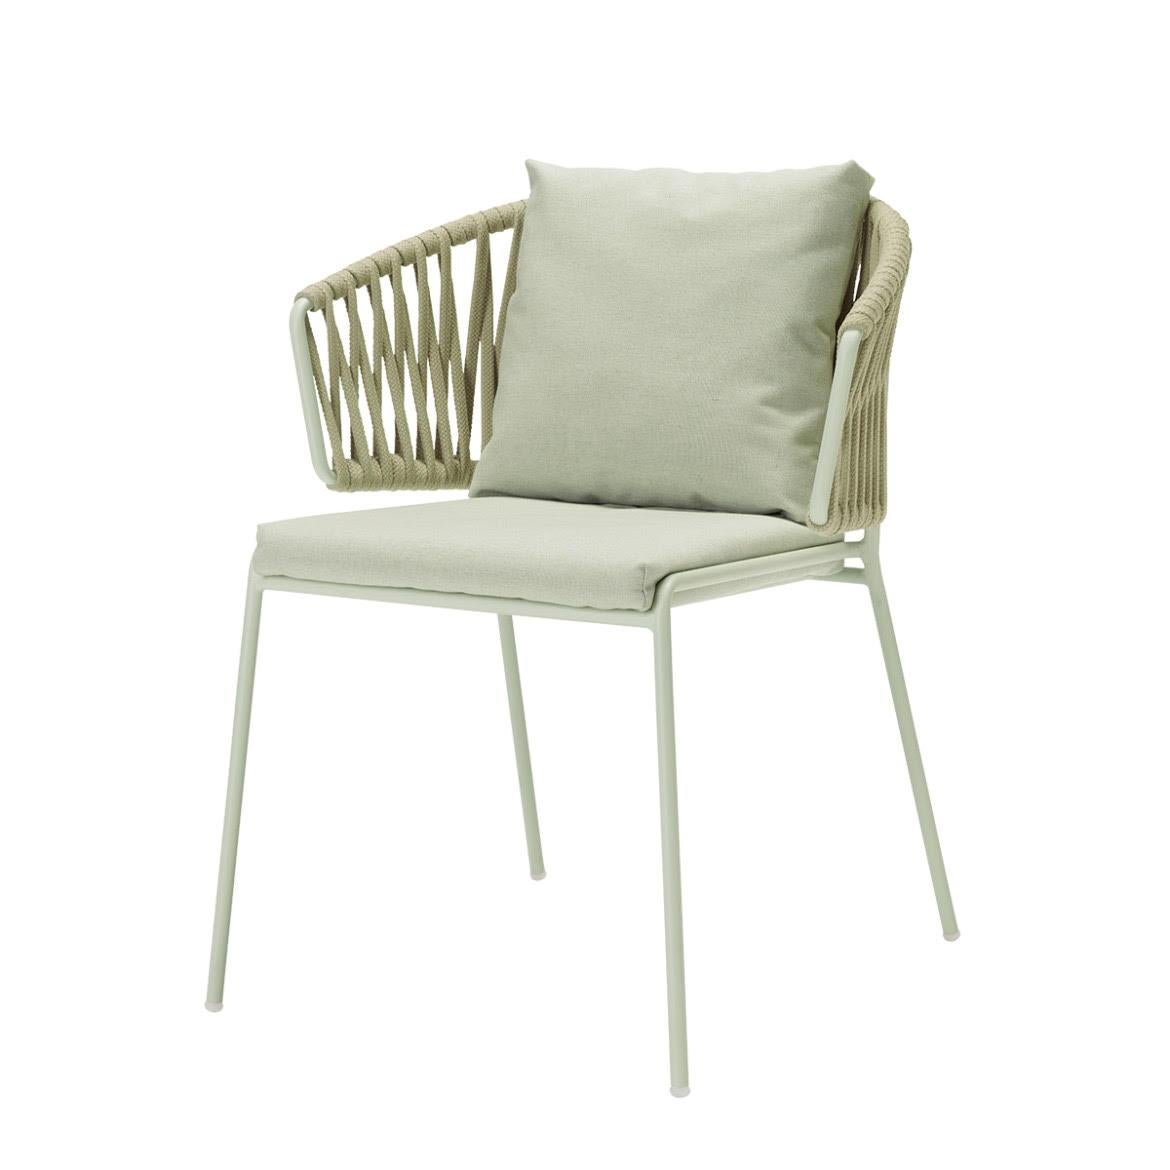 Modern Pair of Cream Outdoor or Indoor Metal and Cord Armchairs, 21 century For Sale